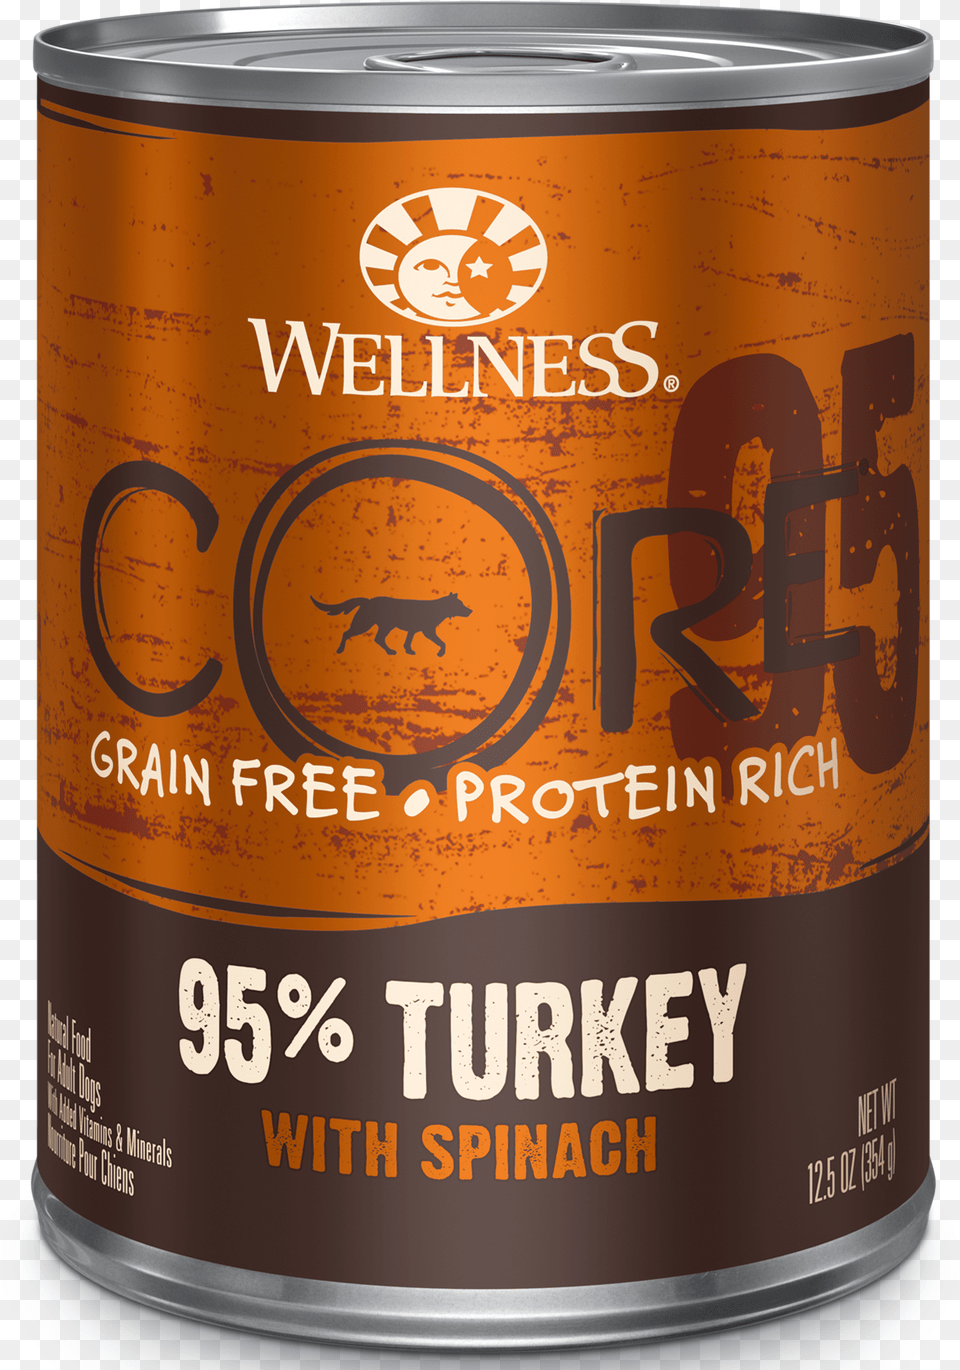 Core 95 Turkey, Tin, Can, Aluminium, Canned Goods Png